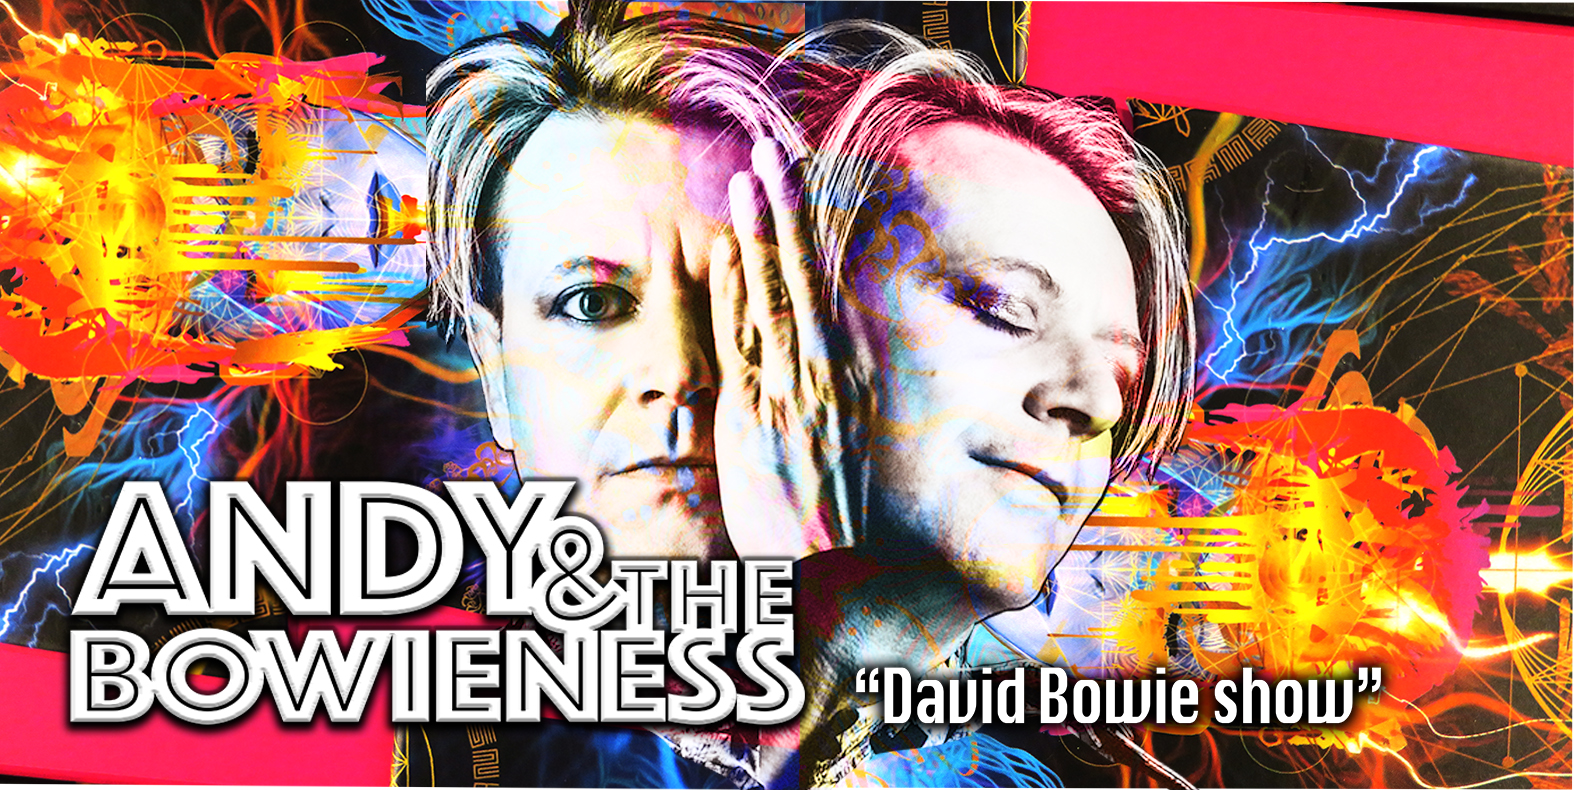 ANDY & THE BOWIENESS
